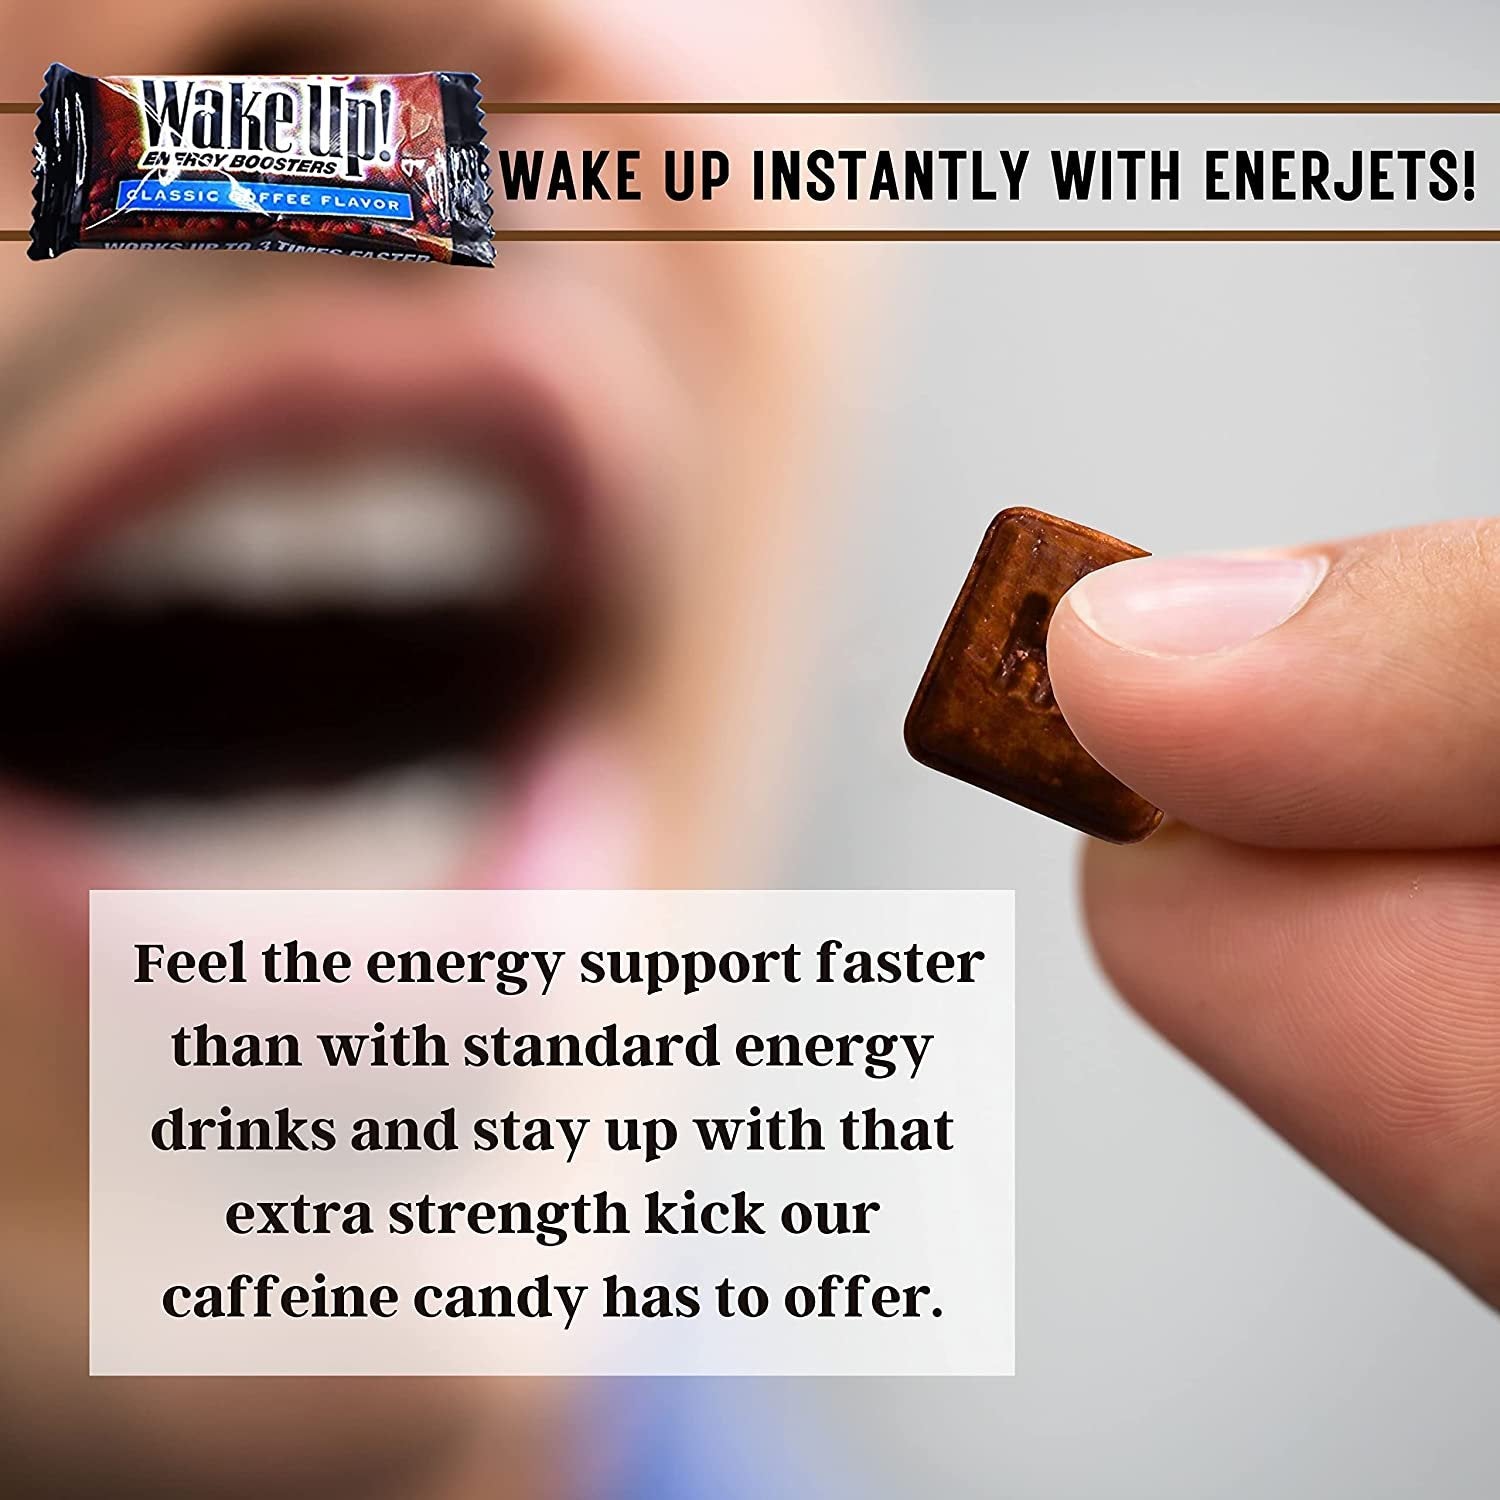 Worldwide Nutrition Enerjets Wake Up Energy Booster Caffeinated Drops - Instant Coffee Energy Supplements - Classic Flavor Pack of 3, 12 Drops Per Package with Worldwide Multi Purpose Key Chain